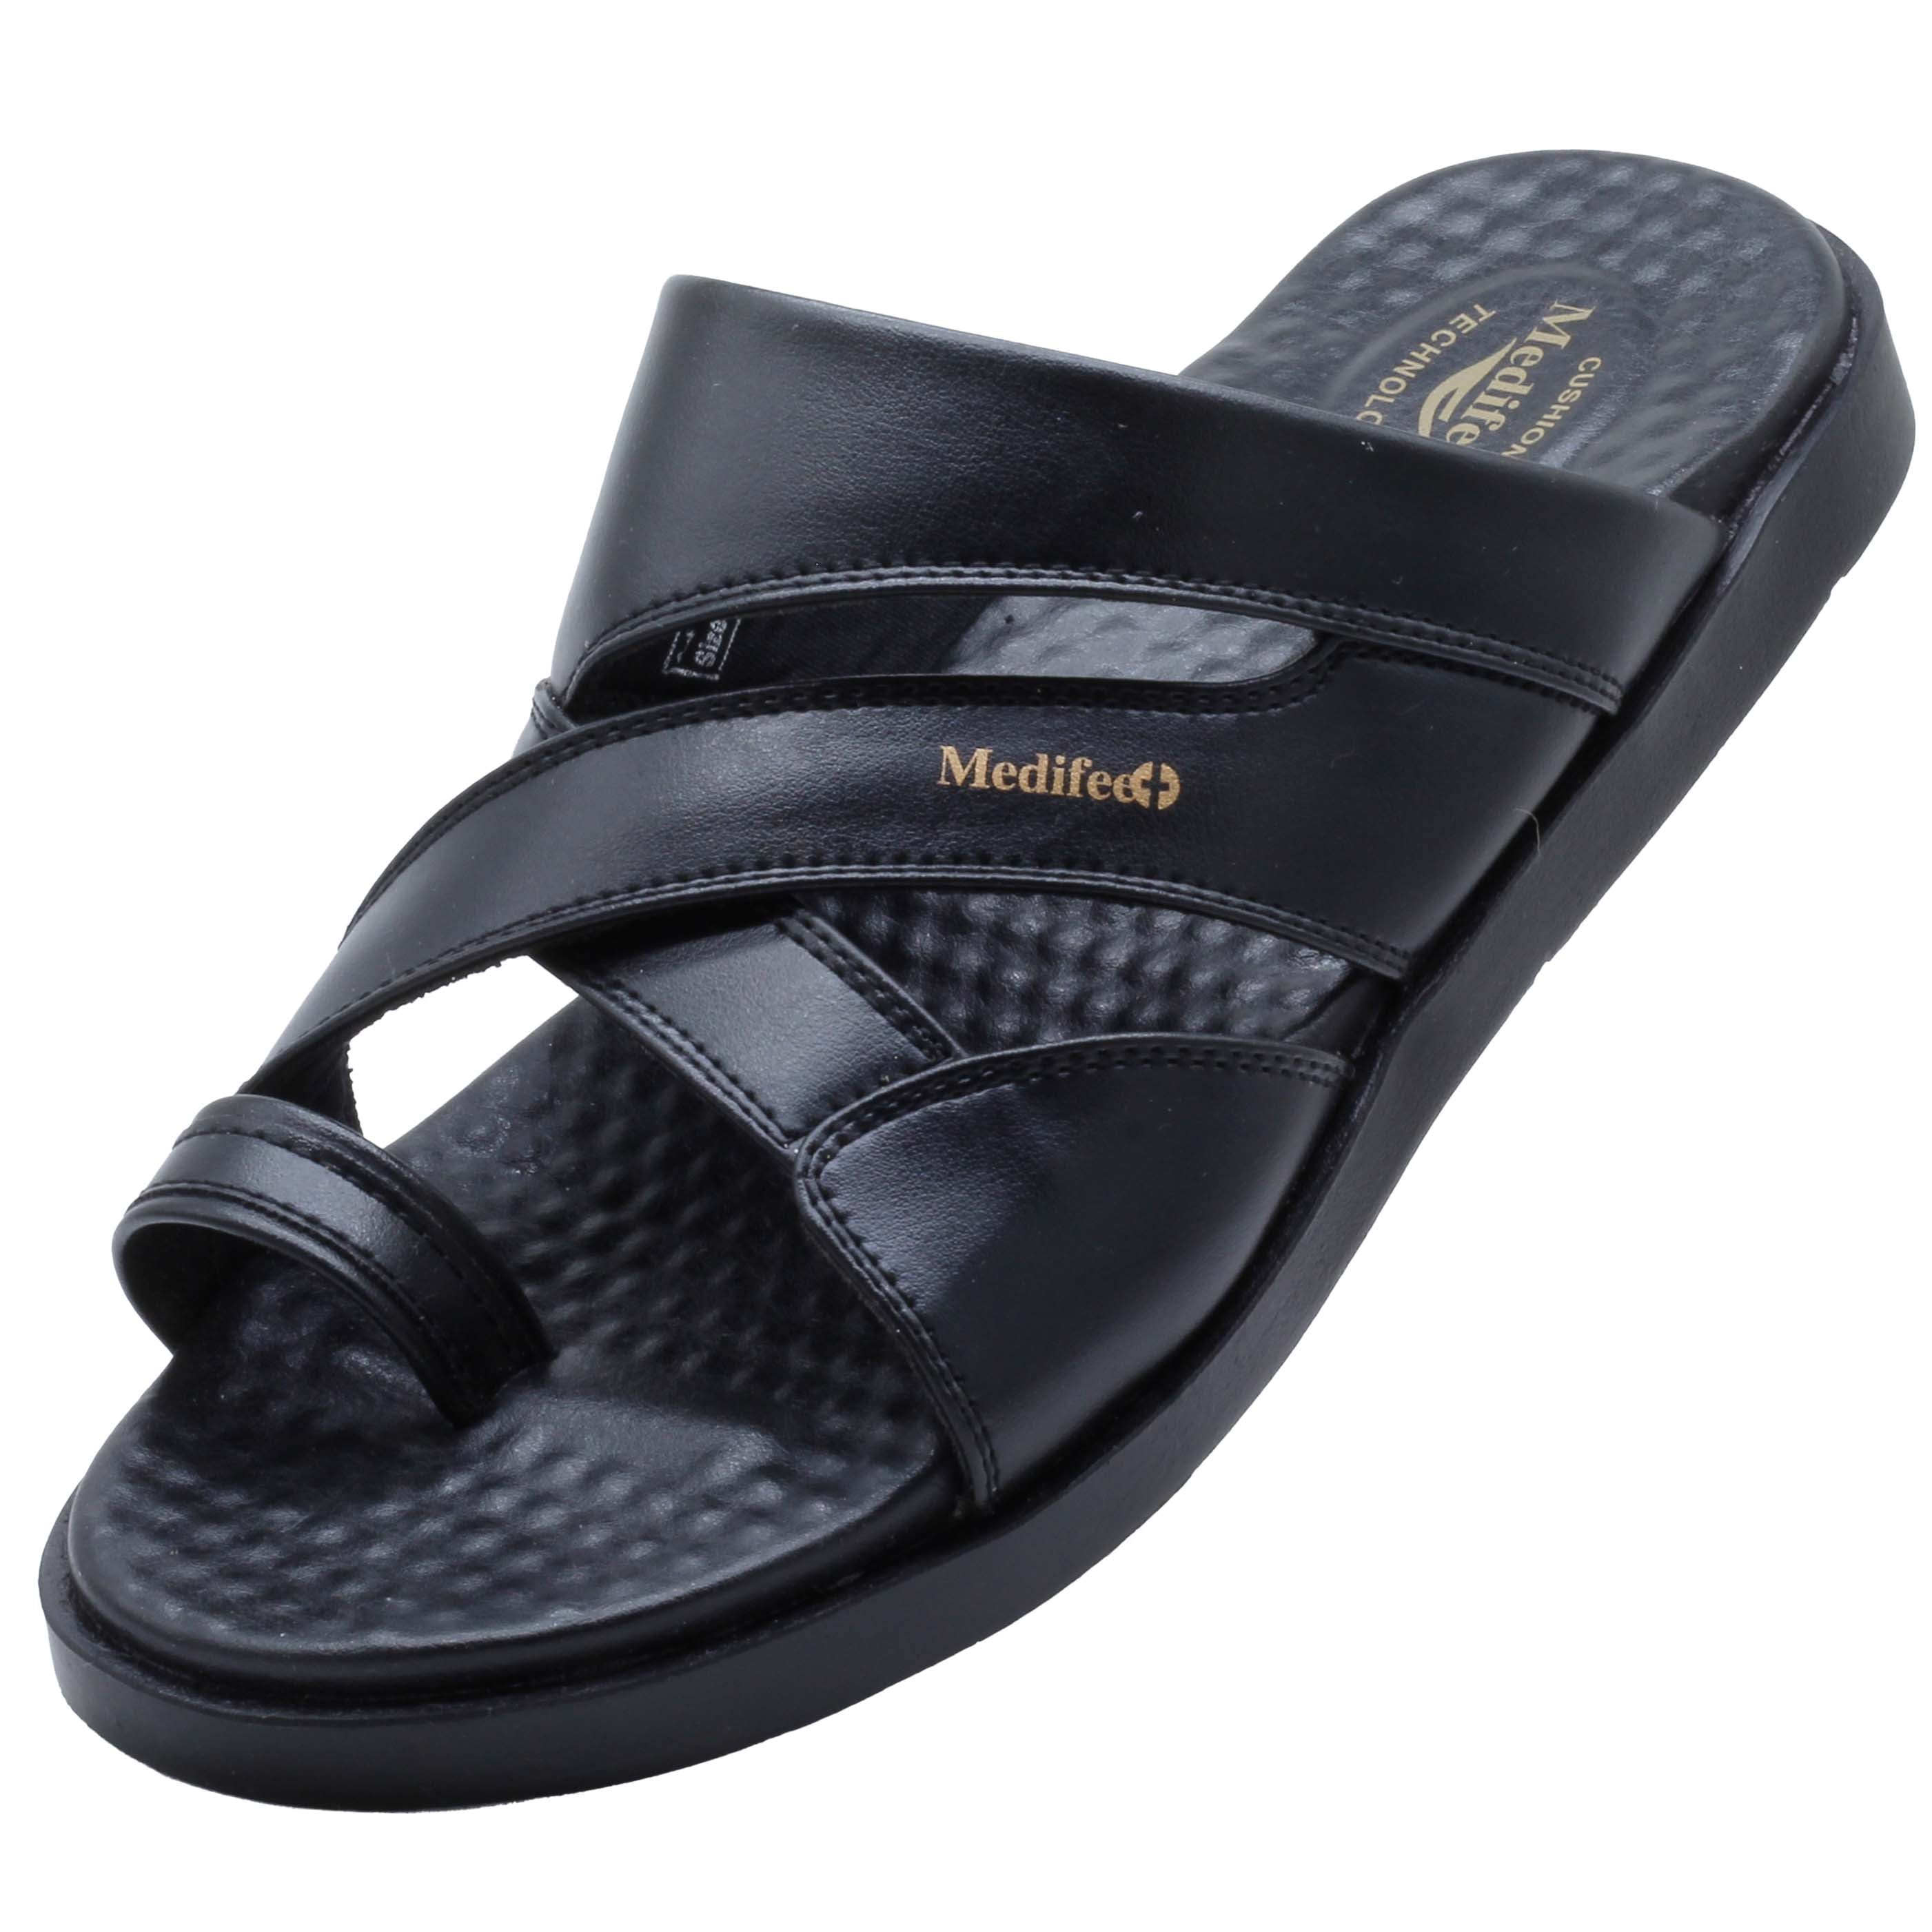 Buy Medlife Orthopedic & Diabetic Care Footwear/Slipper/Chappal for Men  with Extra Cushioning (Black, numeric_11) at Amazon.in